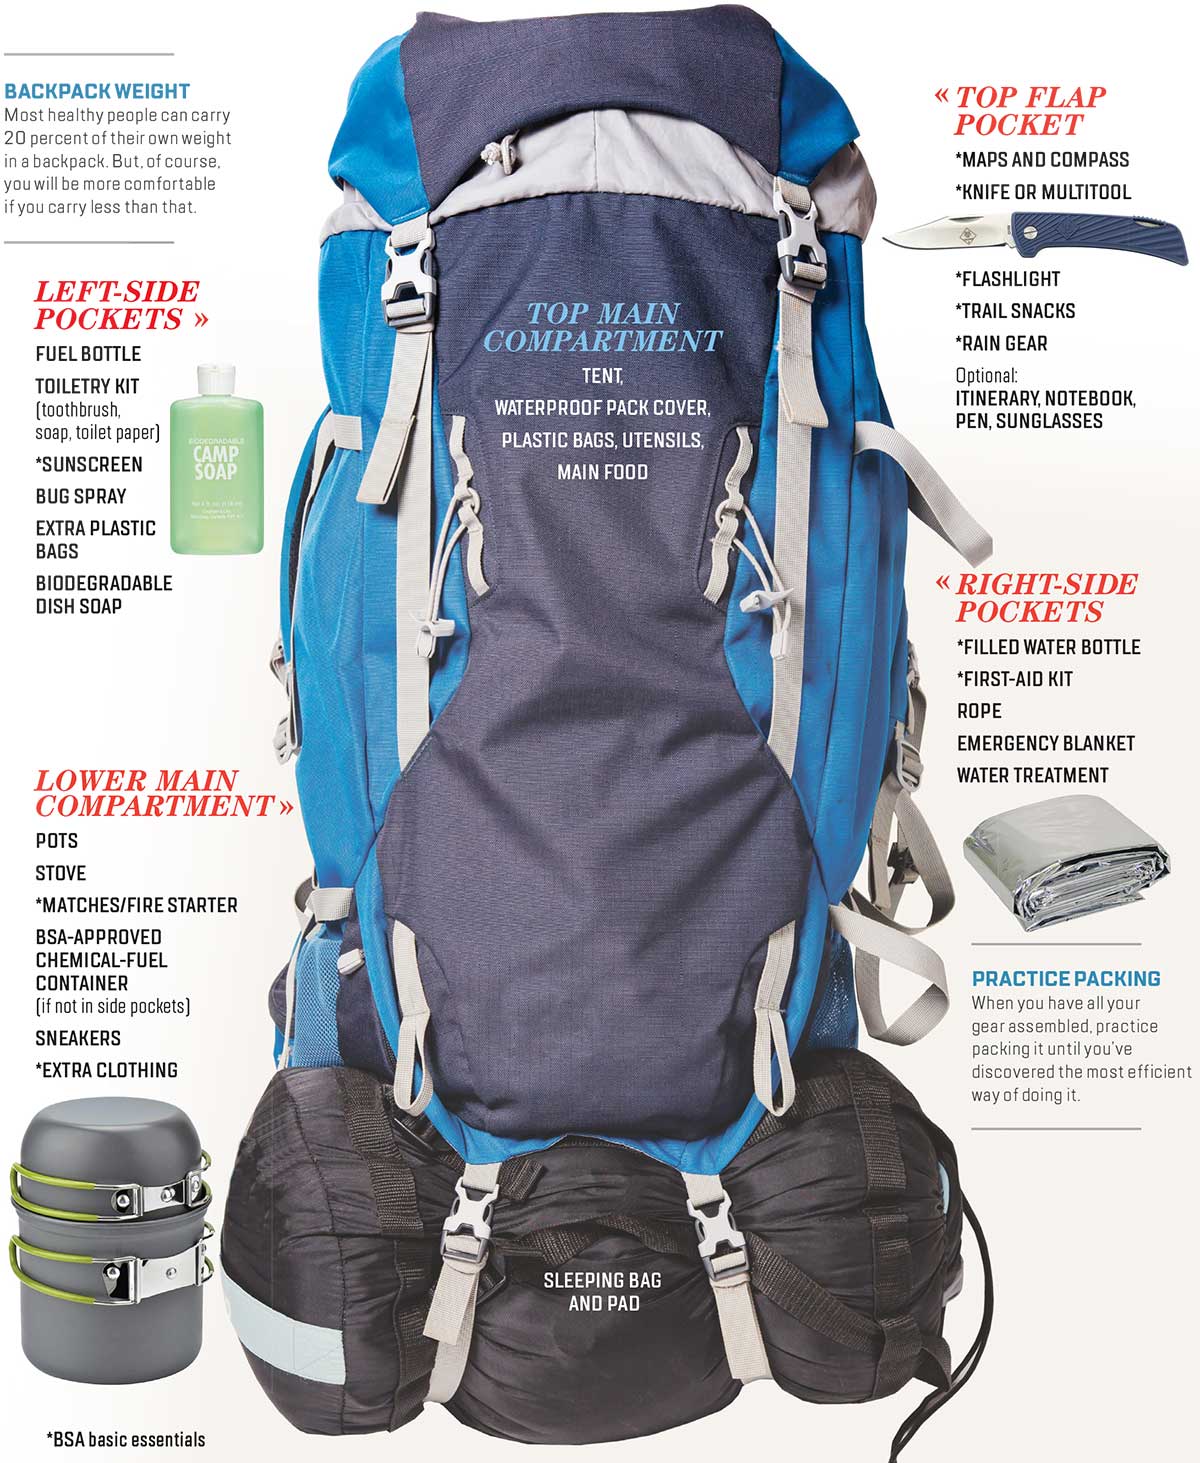 How to Pack a Backpack - WellpackeDpack